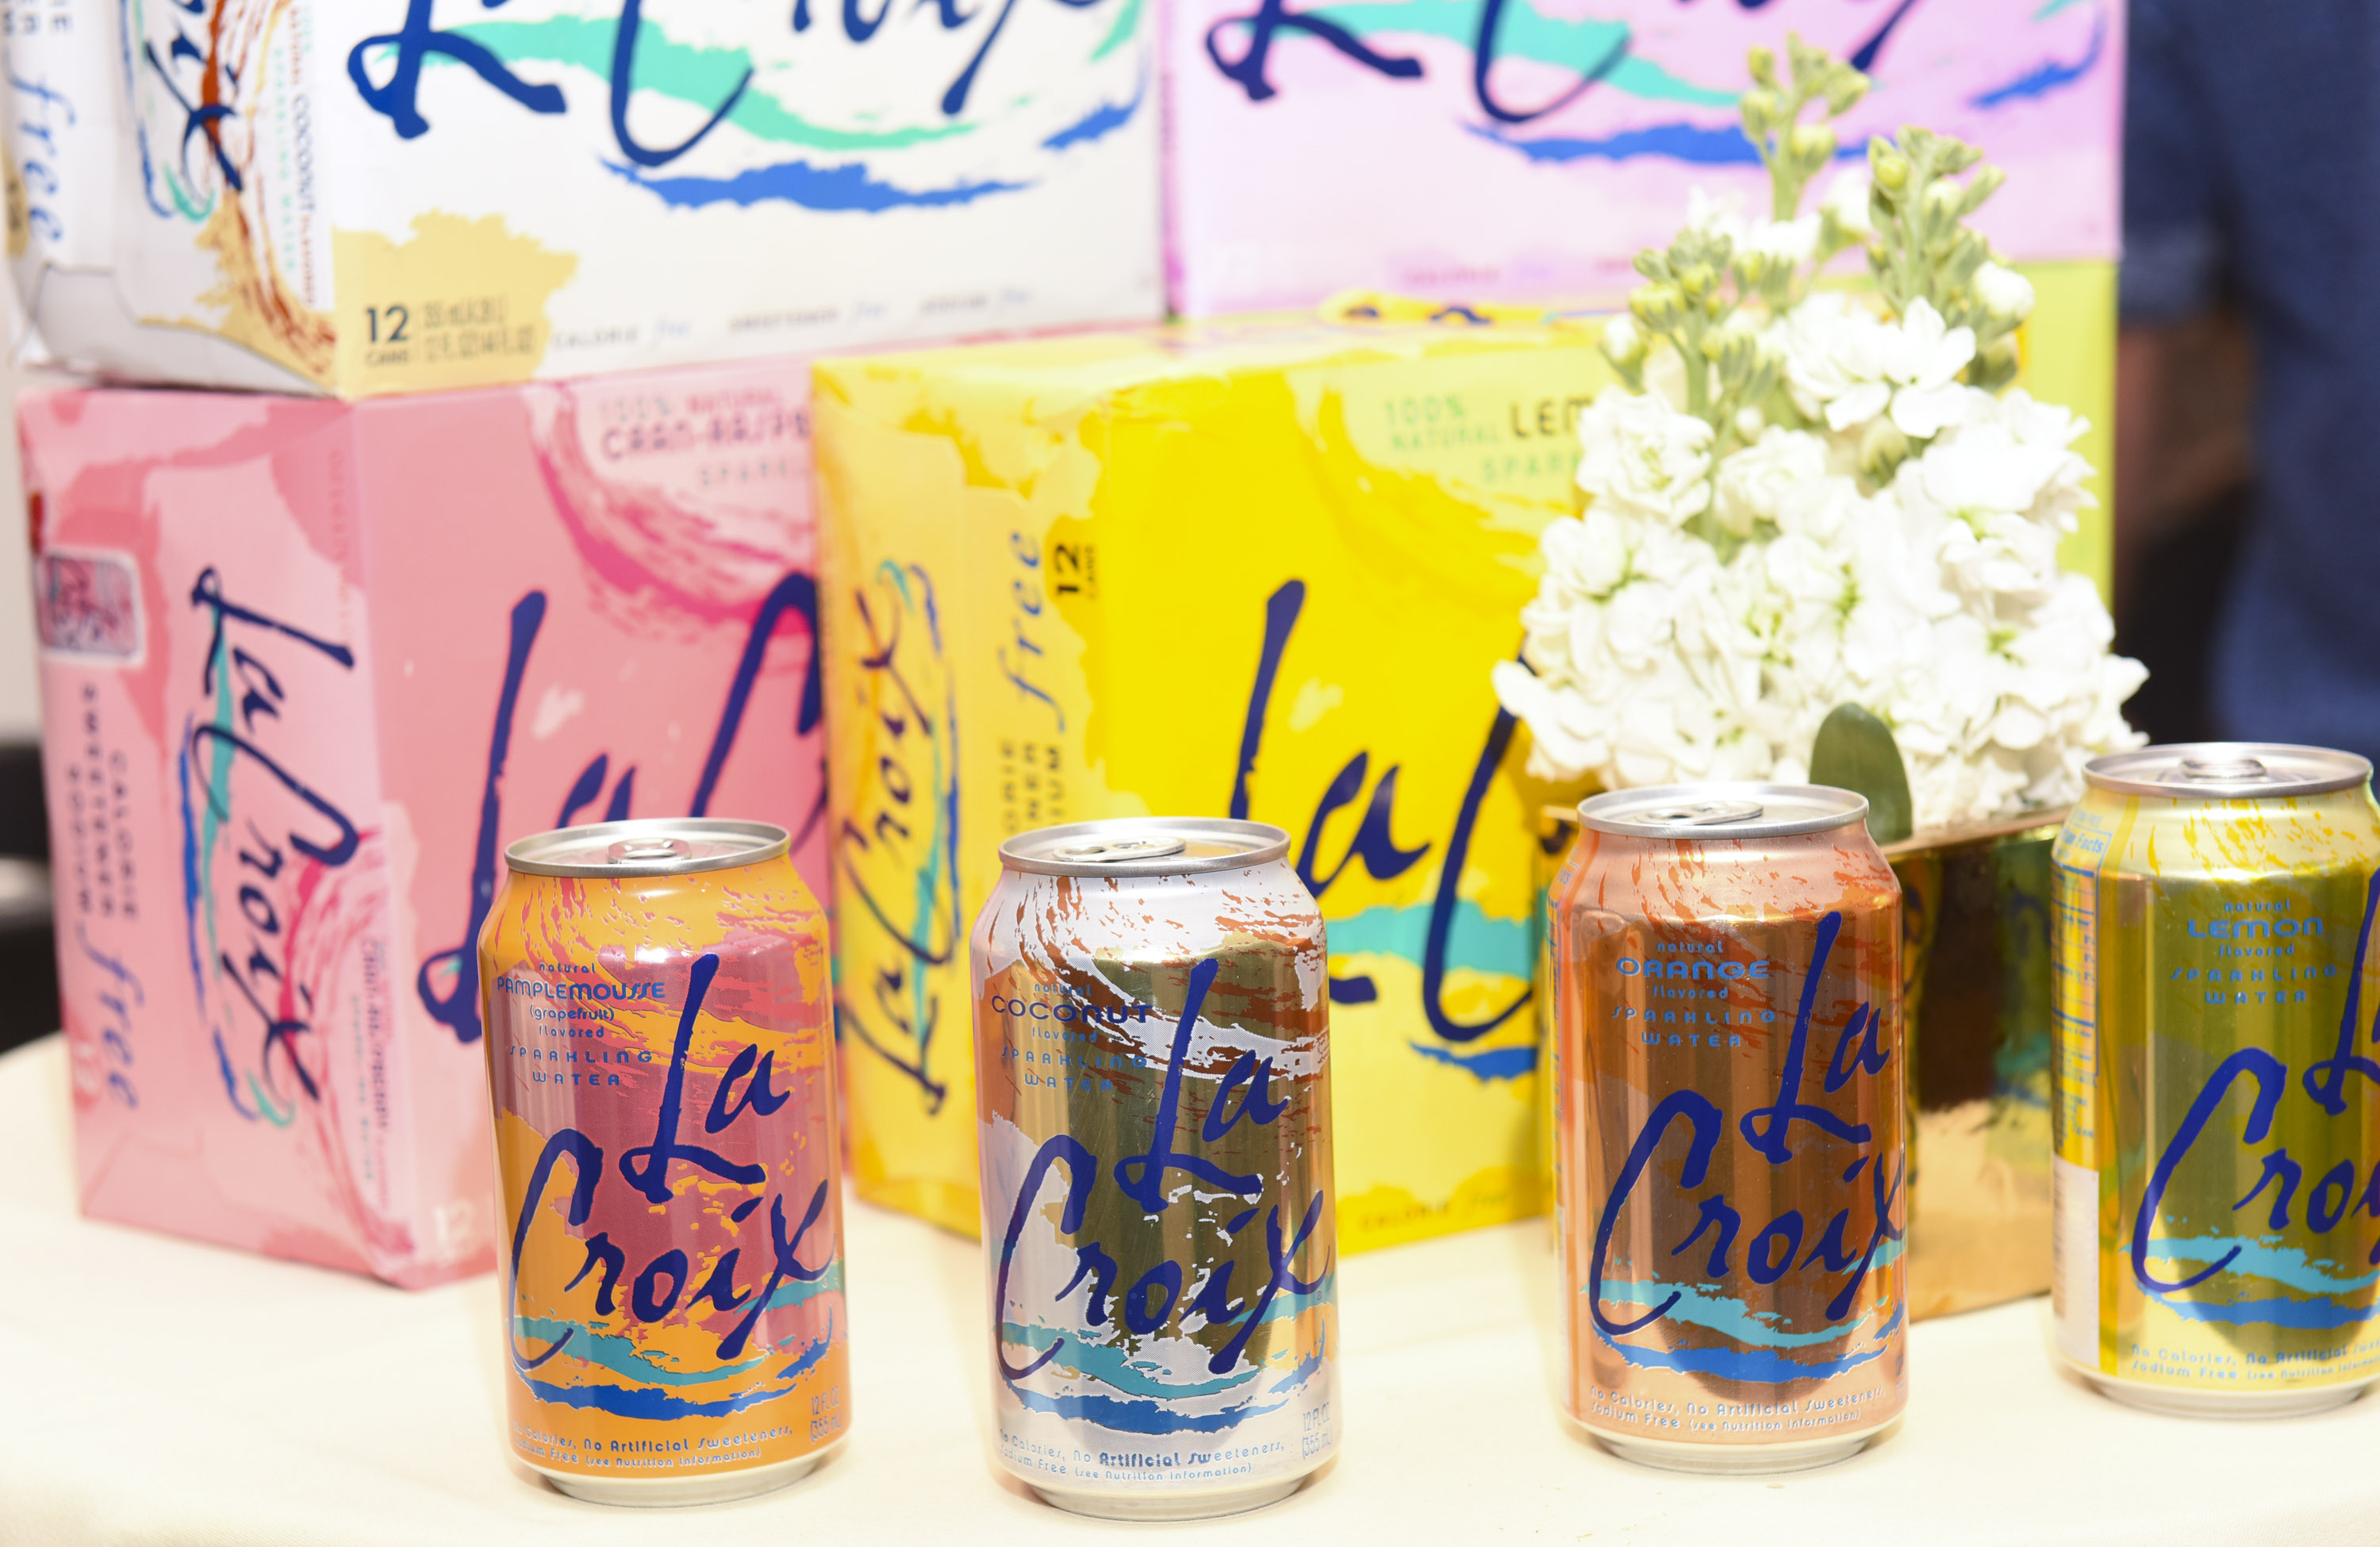 BEVERLY HILLS, CA - FEBRUARY 25:  LaCroix Sparkling Water at the ECOLUXE Pre-Oscars Celebrity Luxury Lounge on February 25, 2016 in Beverly Hills, California. (Photo by Vivien Killilea/WireImage)